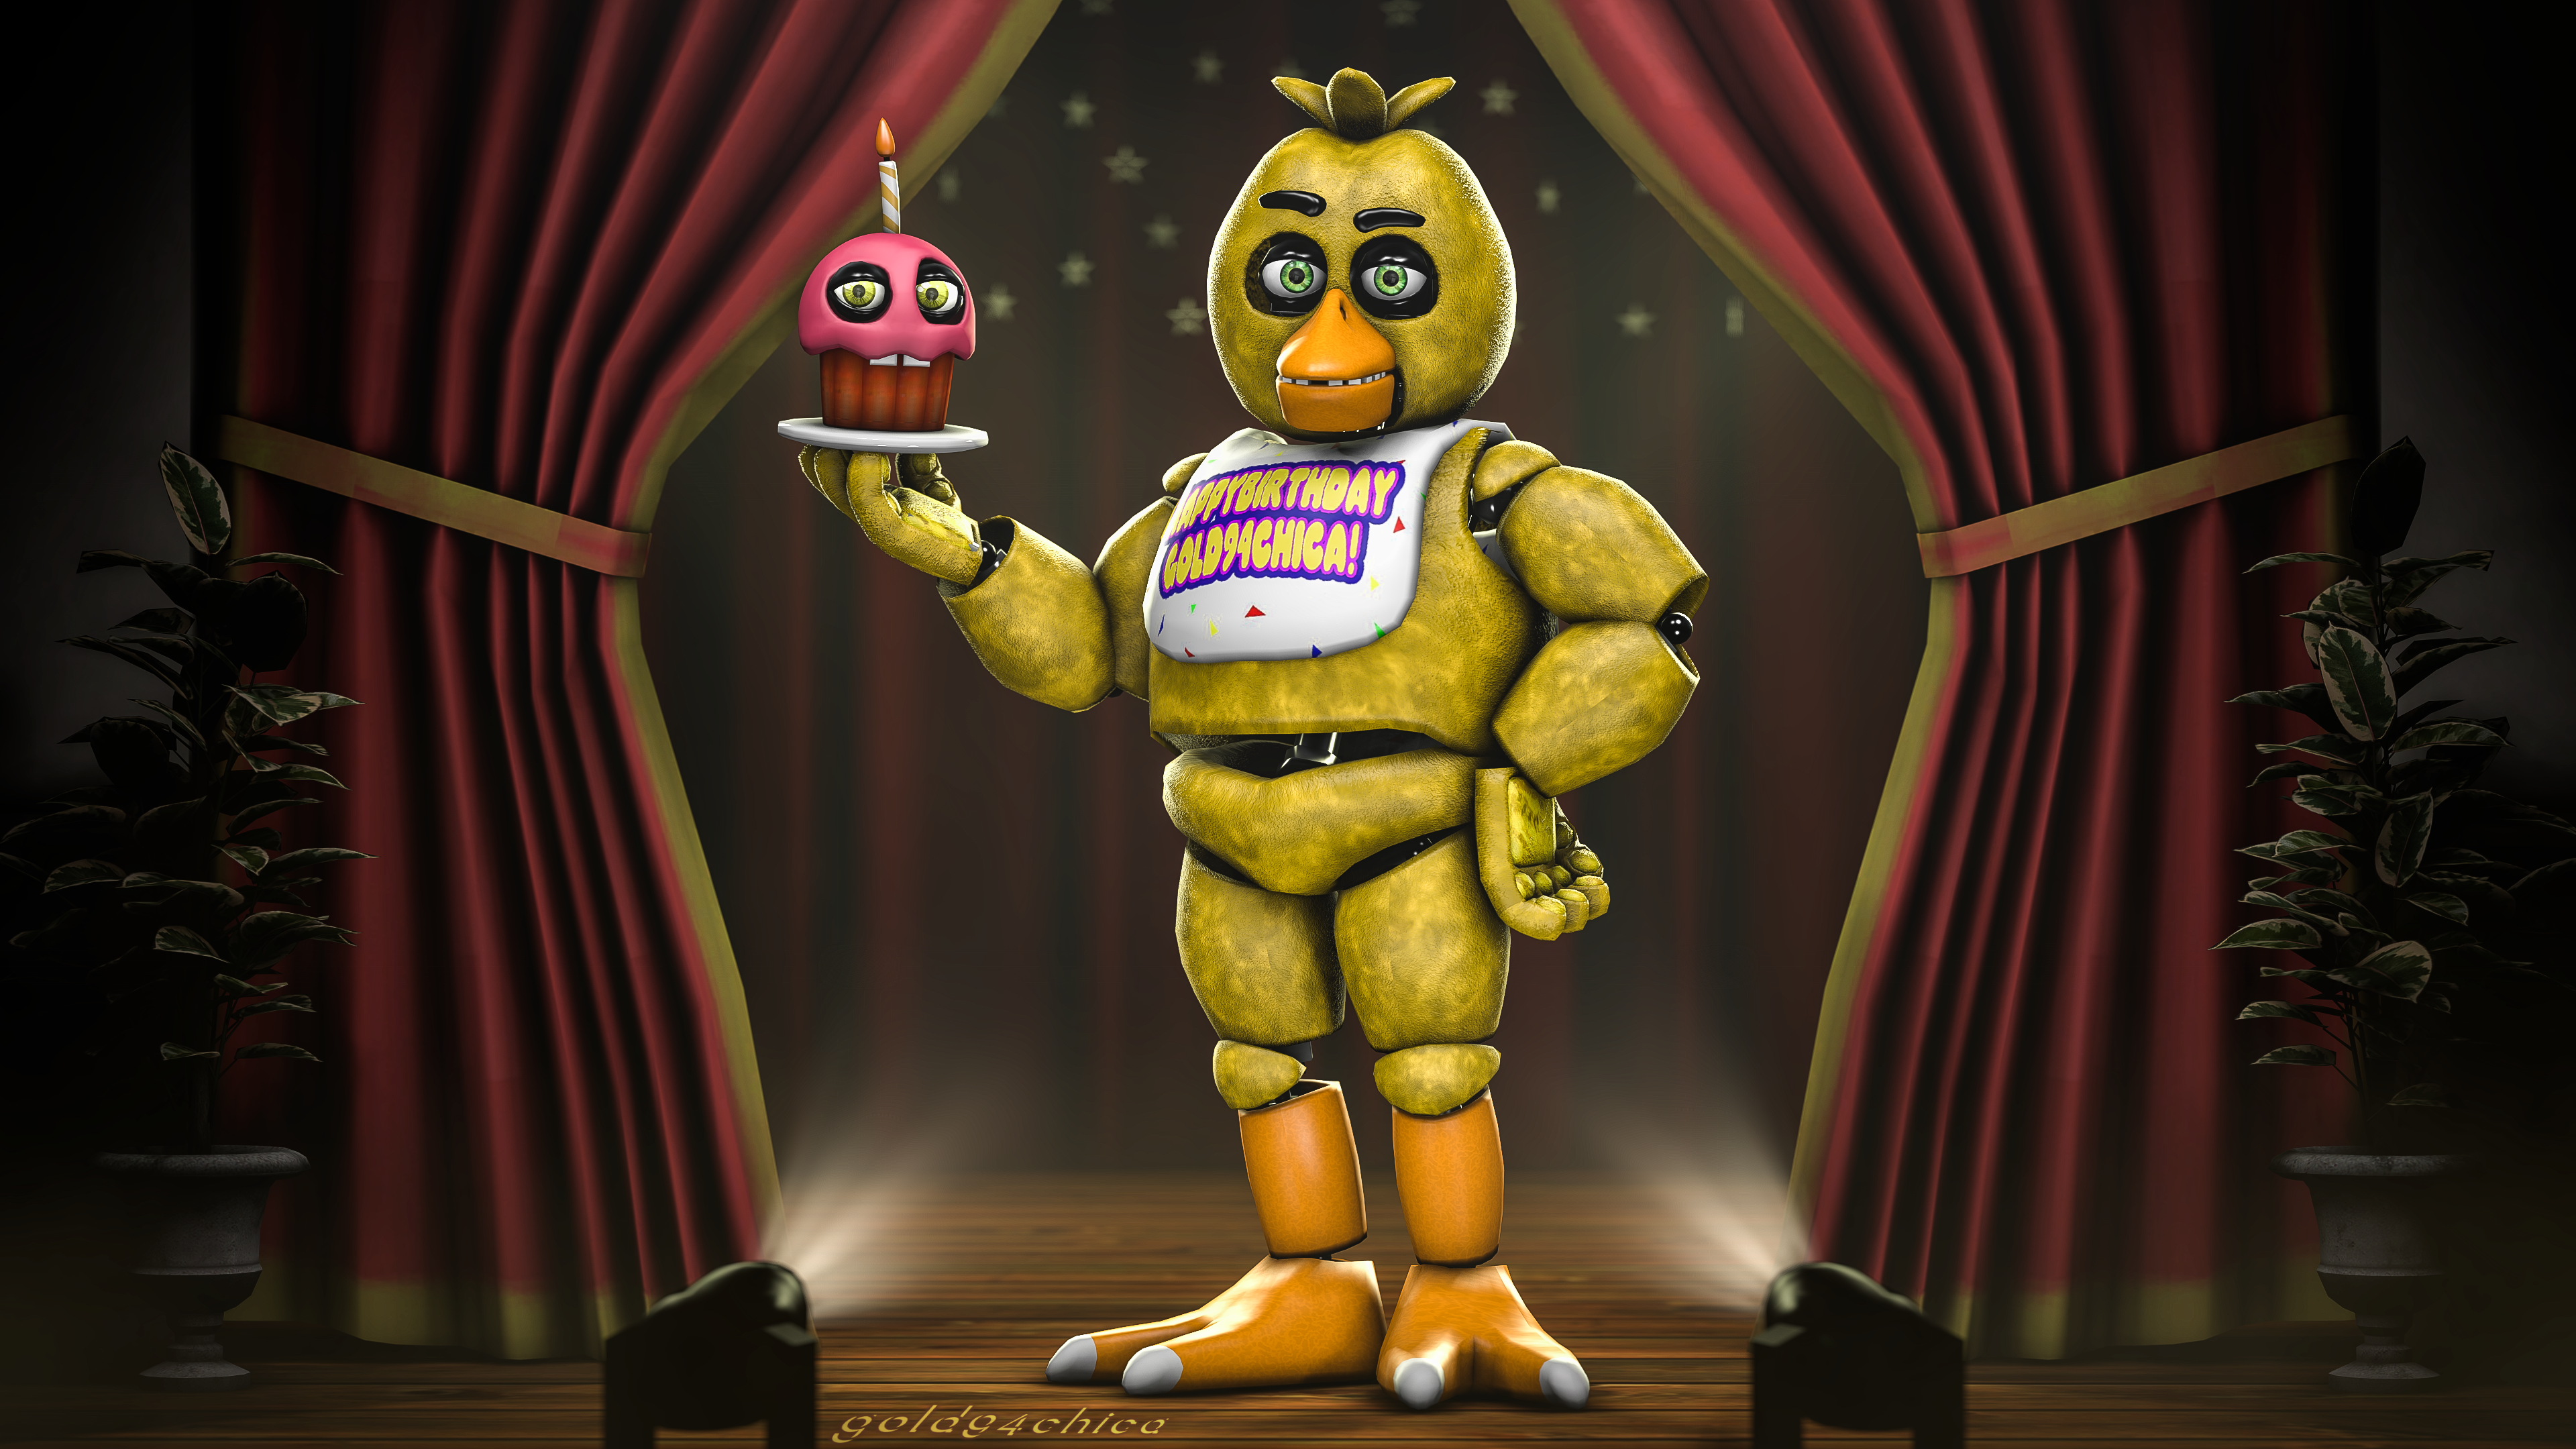 Chica by gold94chica